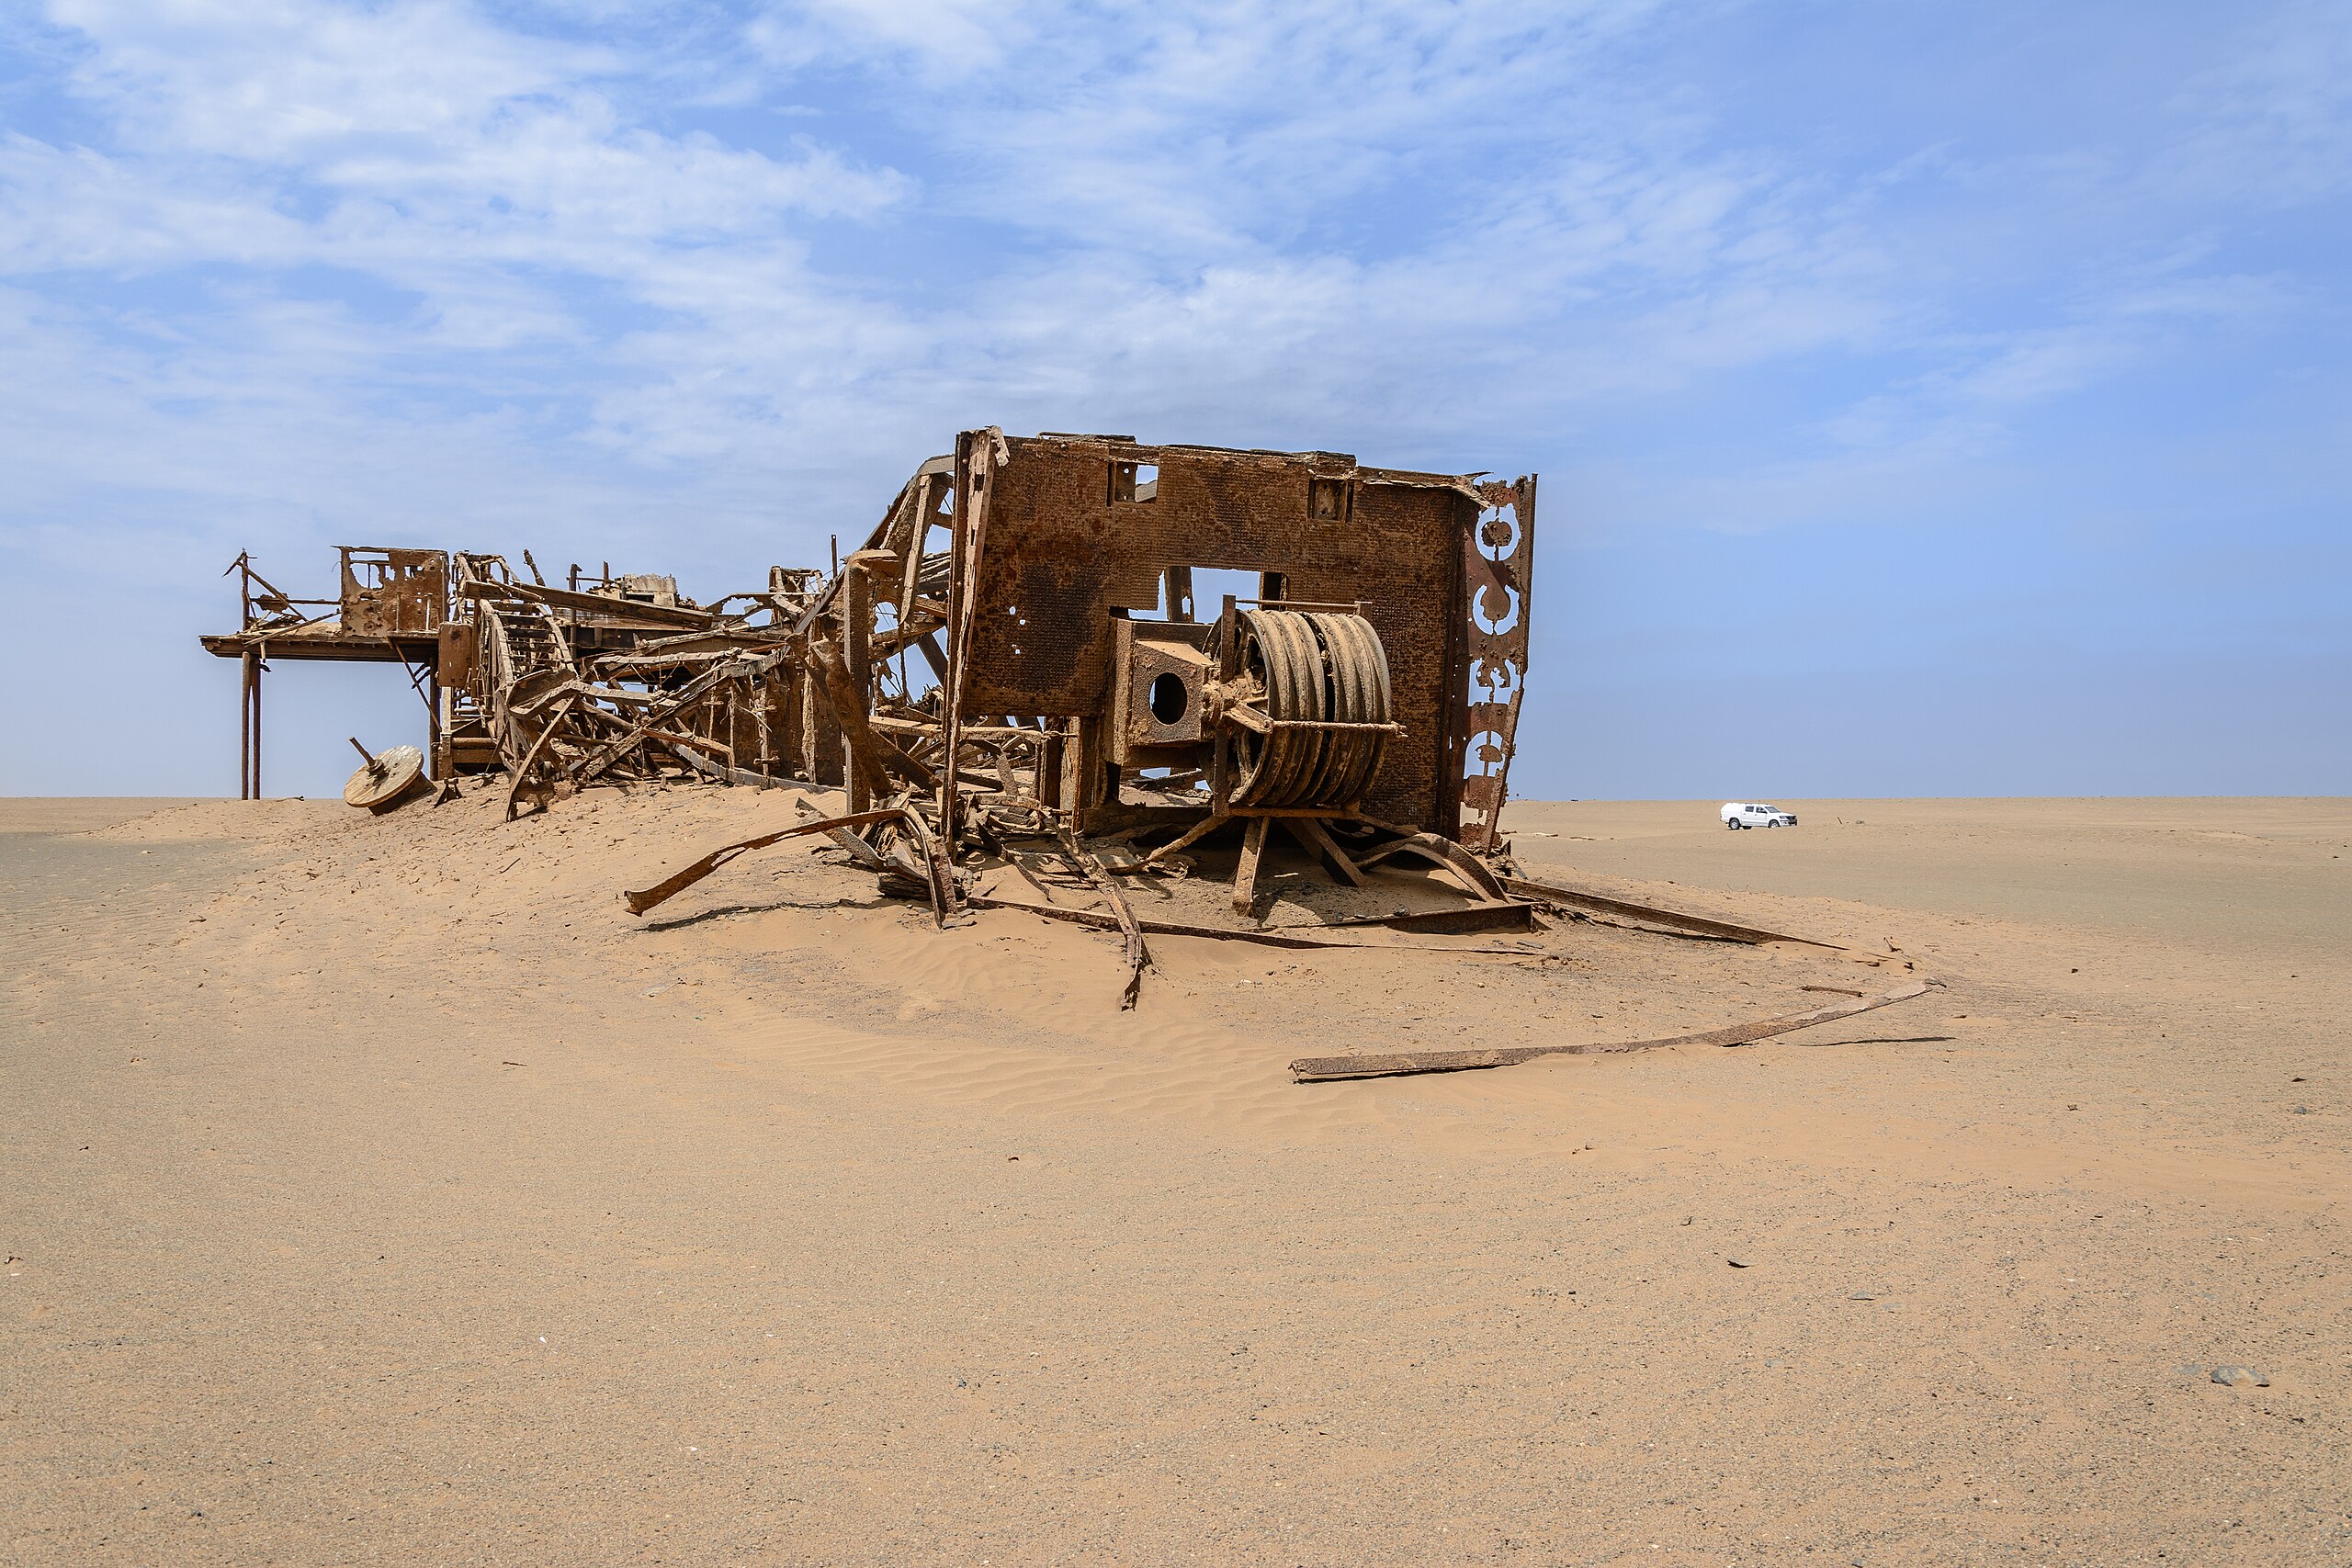 An old rusted and decayed oil rig(?) in the middle of the desert